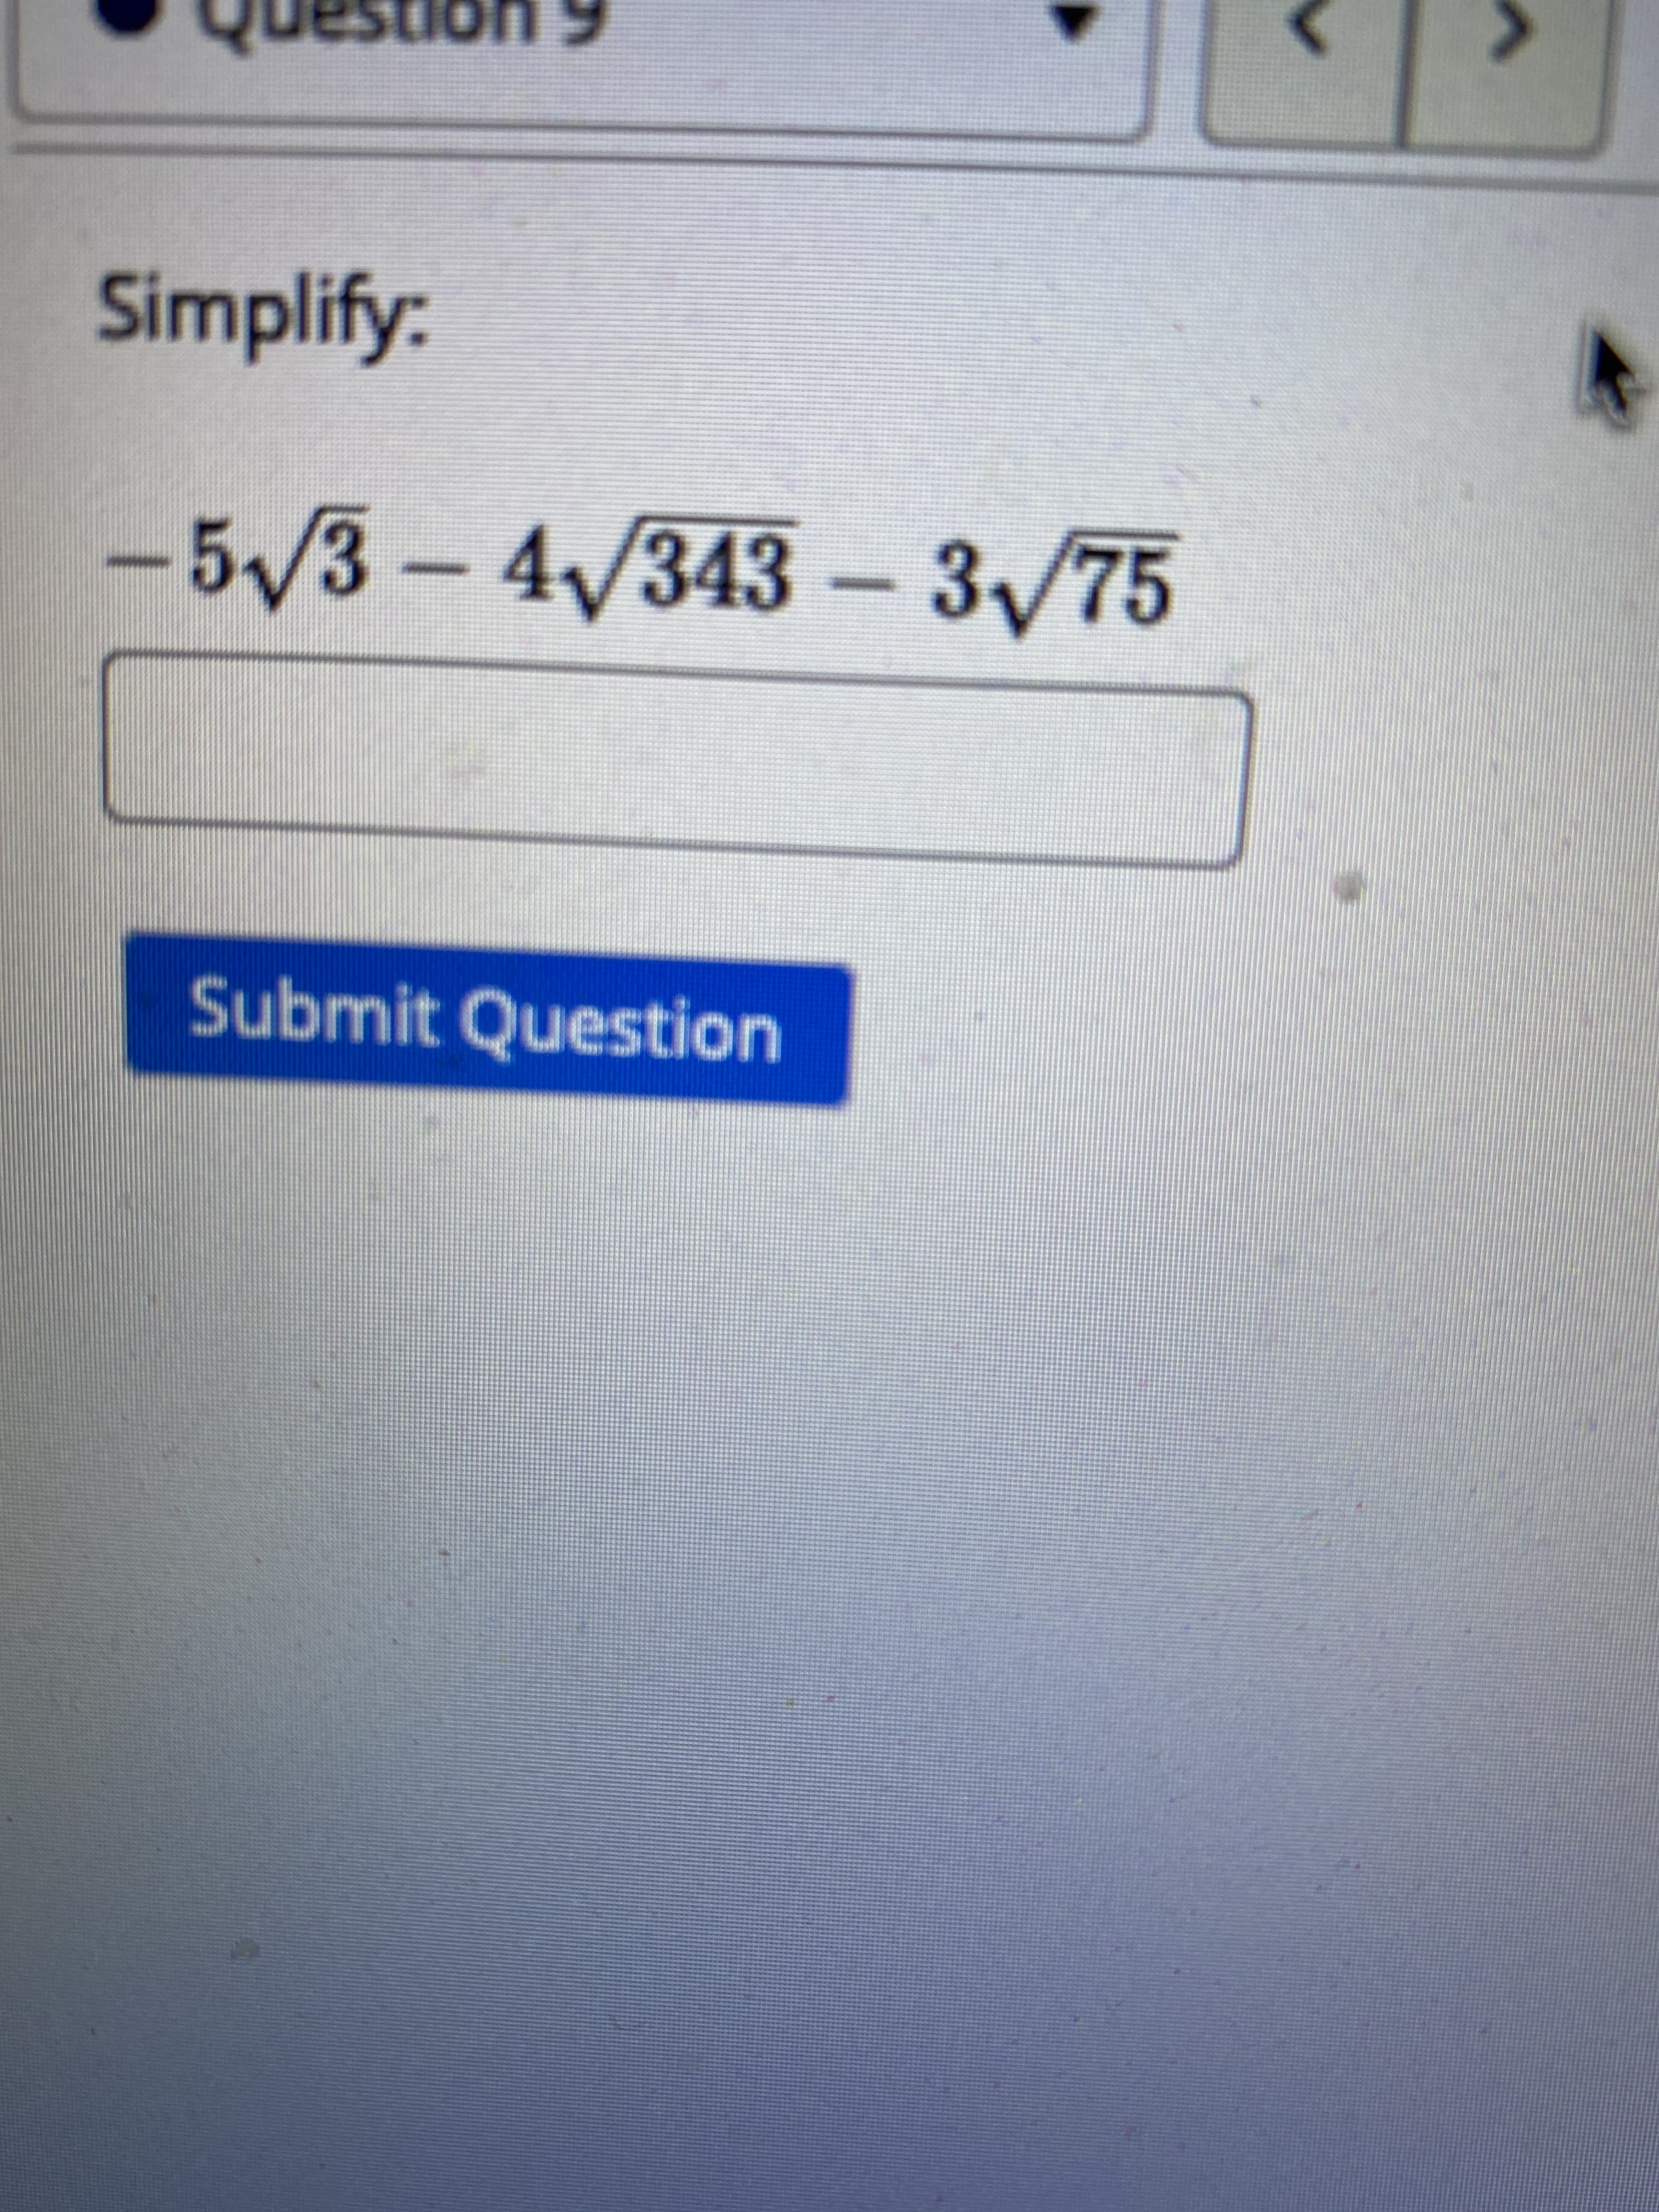 tion
LIc
Simplify:
-
5/3-4/343
– 3/75
Submit Question
